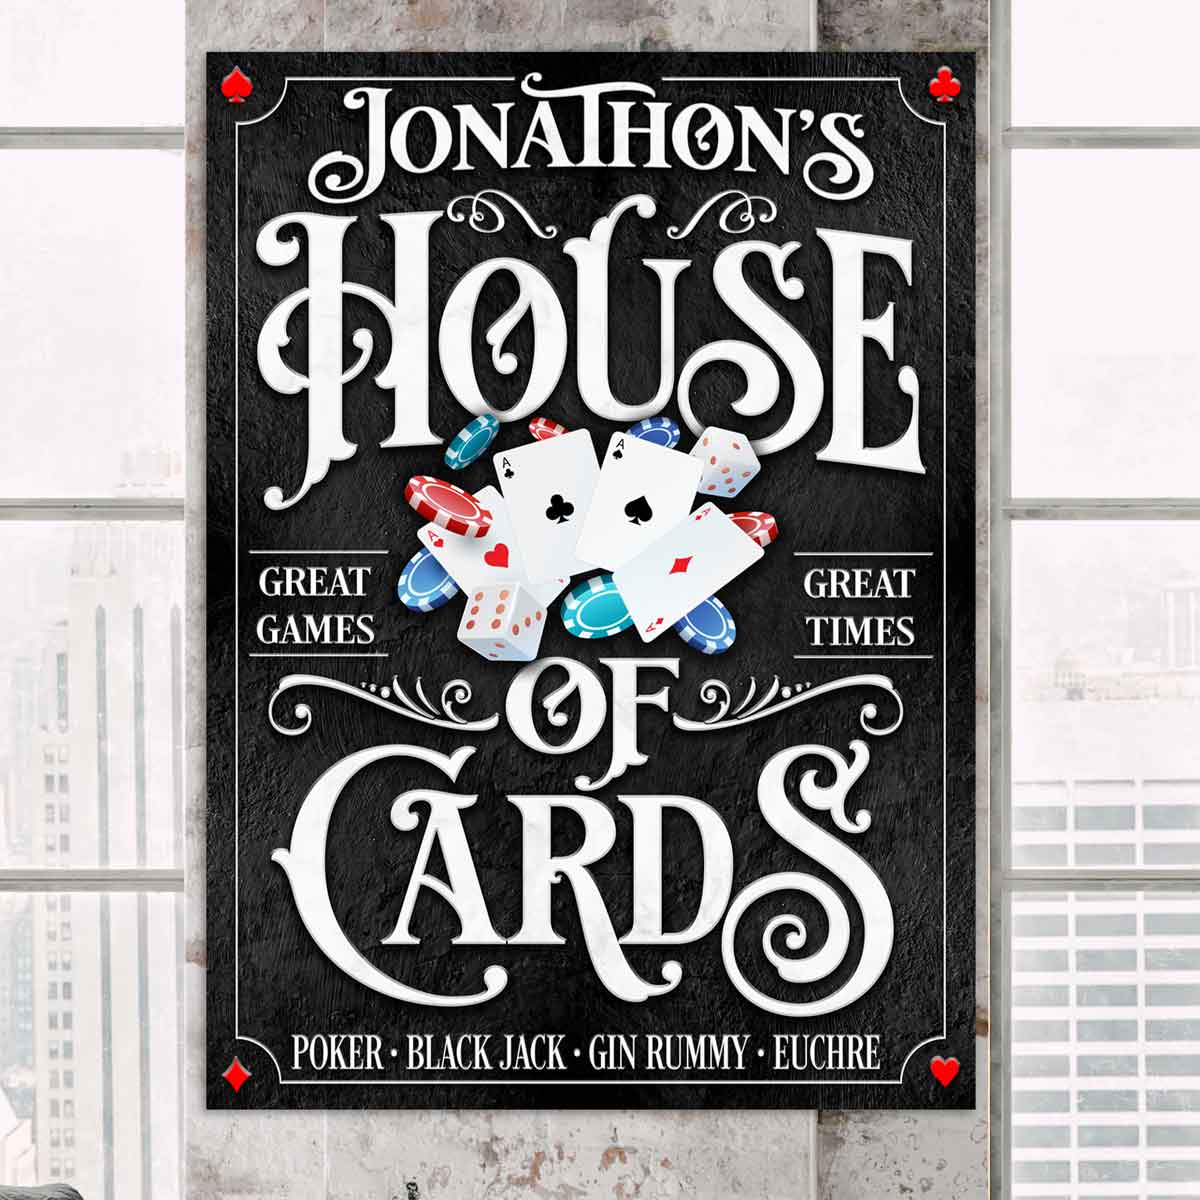 Poker Room Signs and Decor on black textured background with white letters that say House of Cards, great games, great times, Poker, black jack, gin rummy, euchre